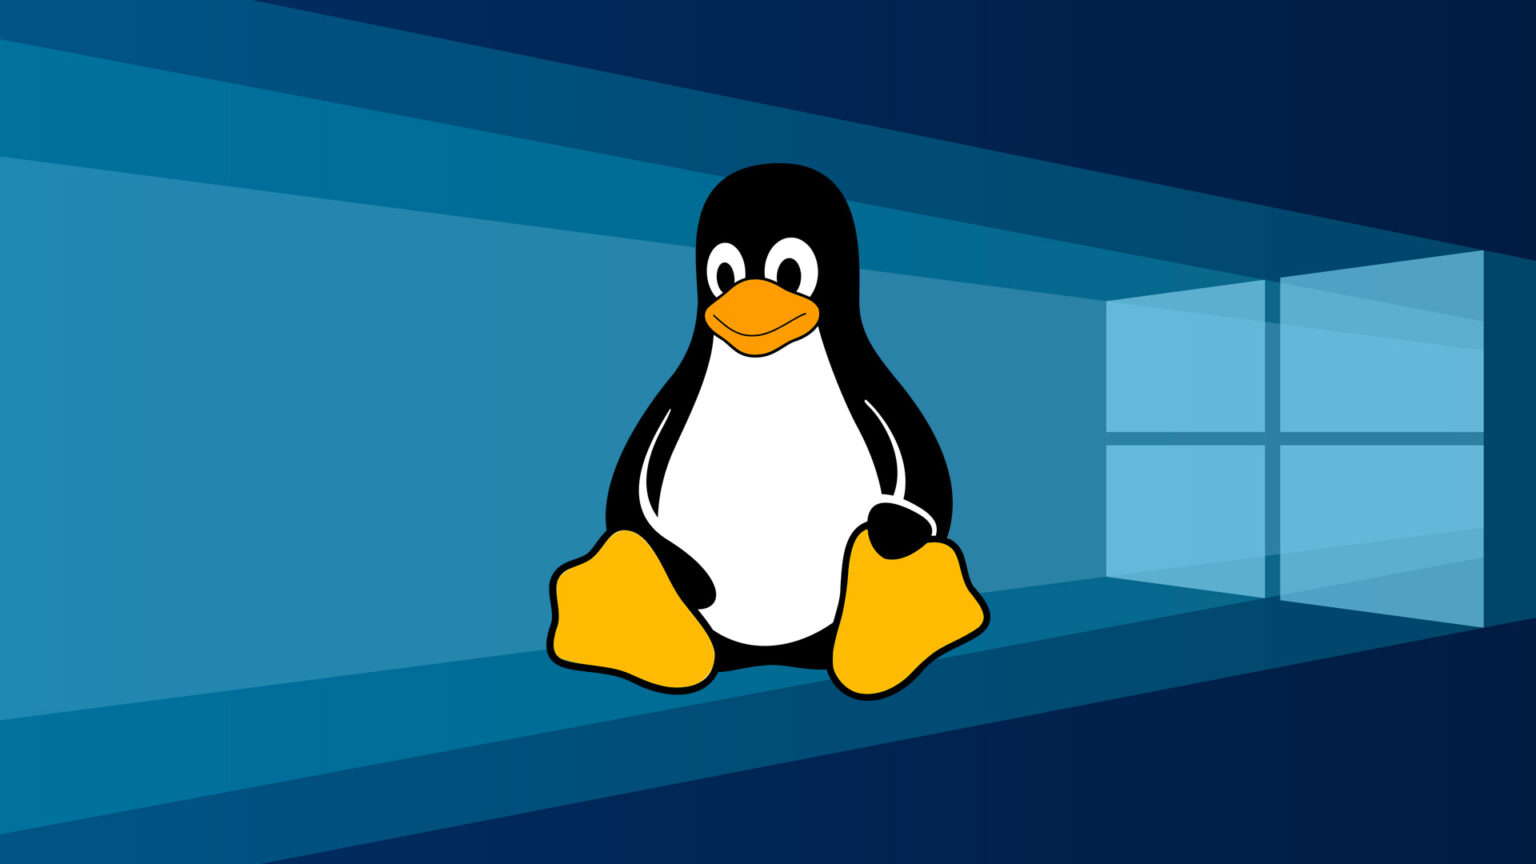 linux os free download for windows vista